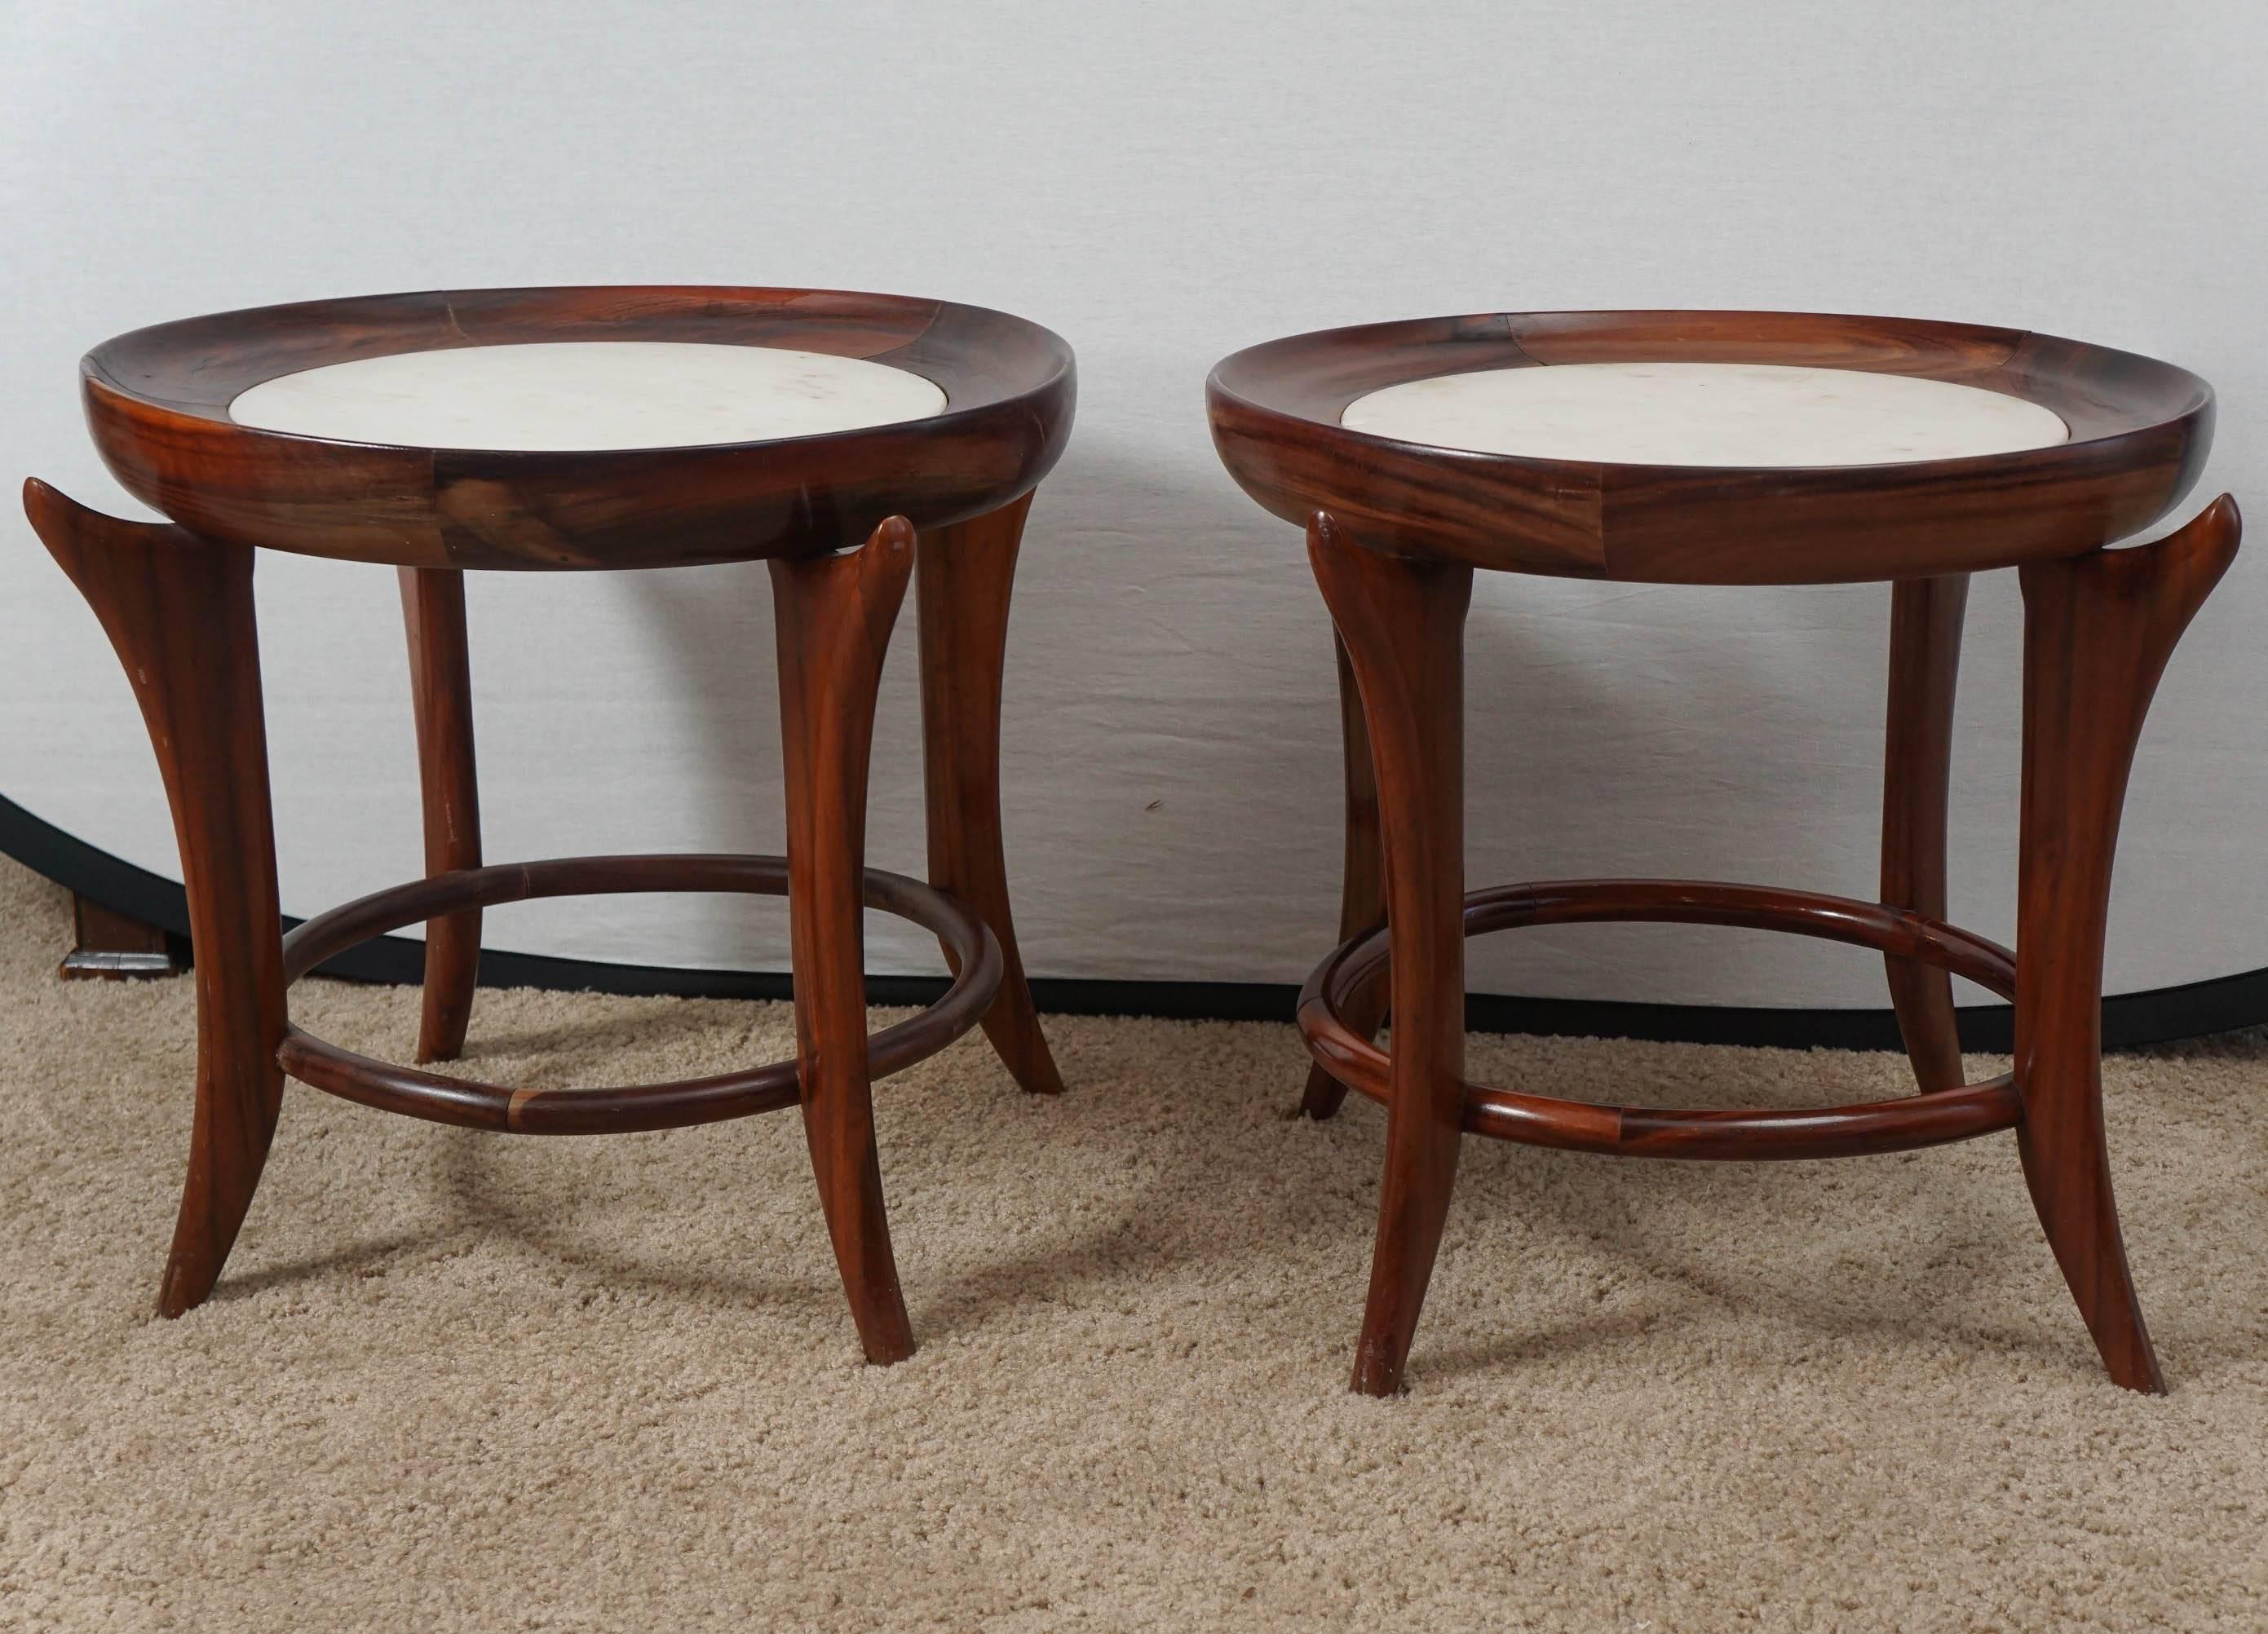 Stunning pair of rosewood and marble side or end tables. Curvy form and wonderful grain create an elegant and airy statement, circa 1960s.